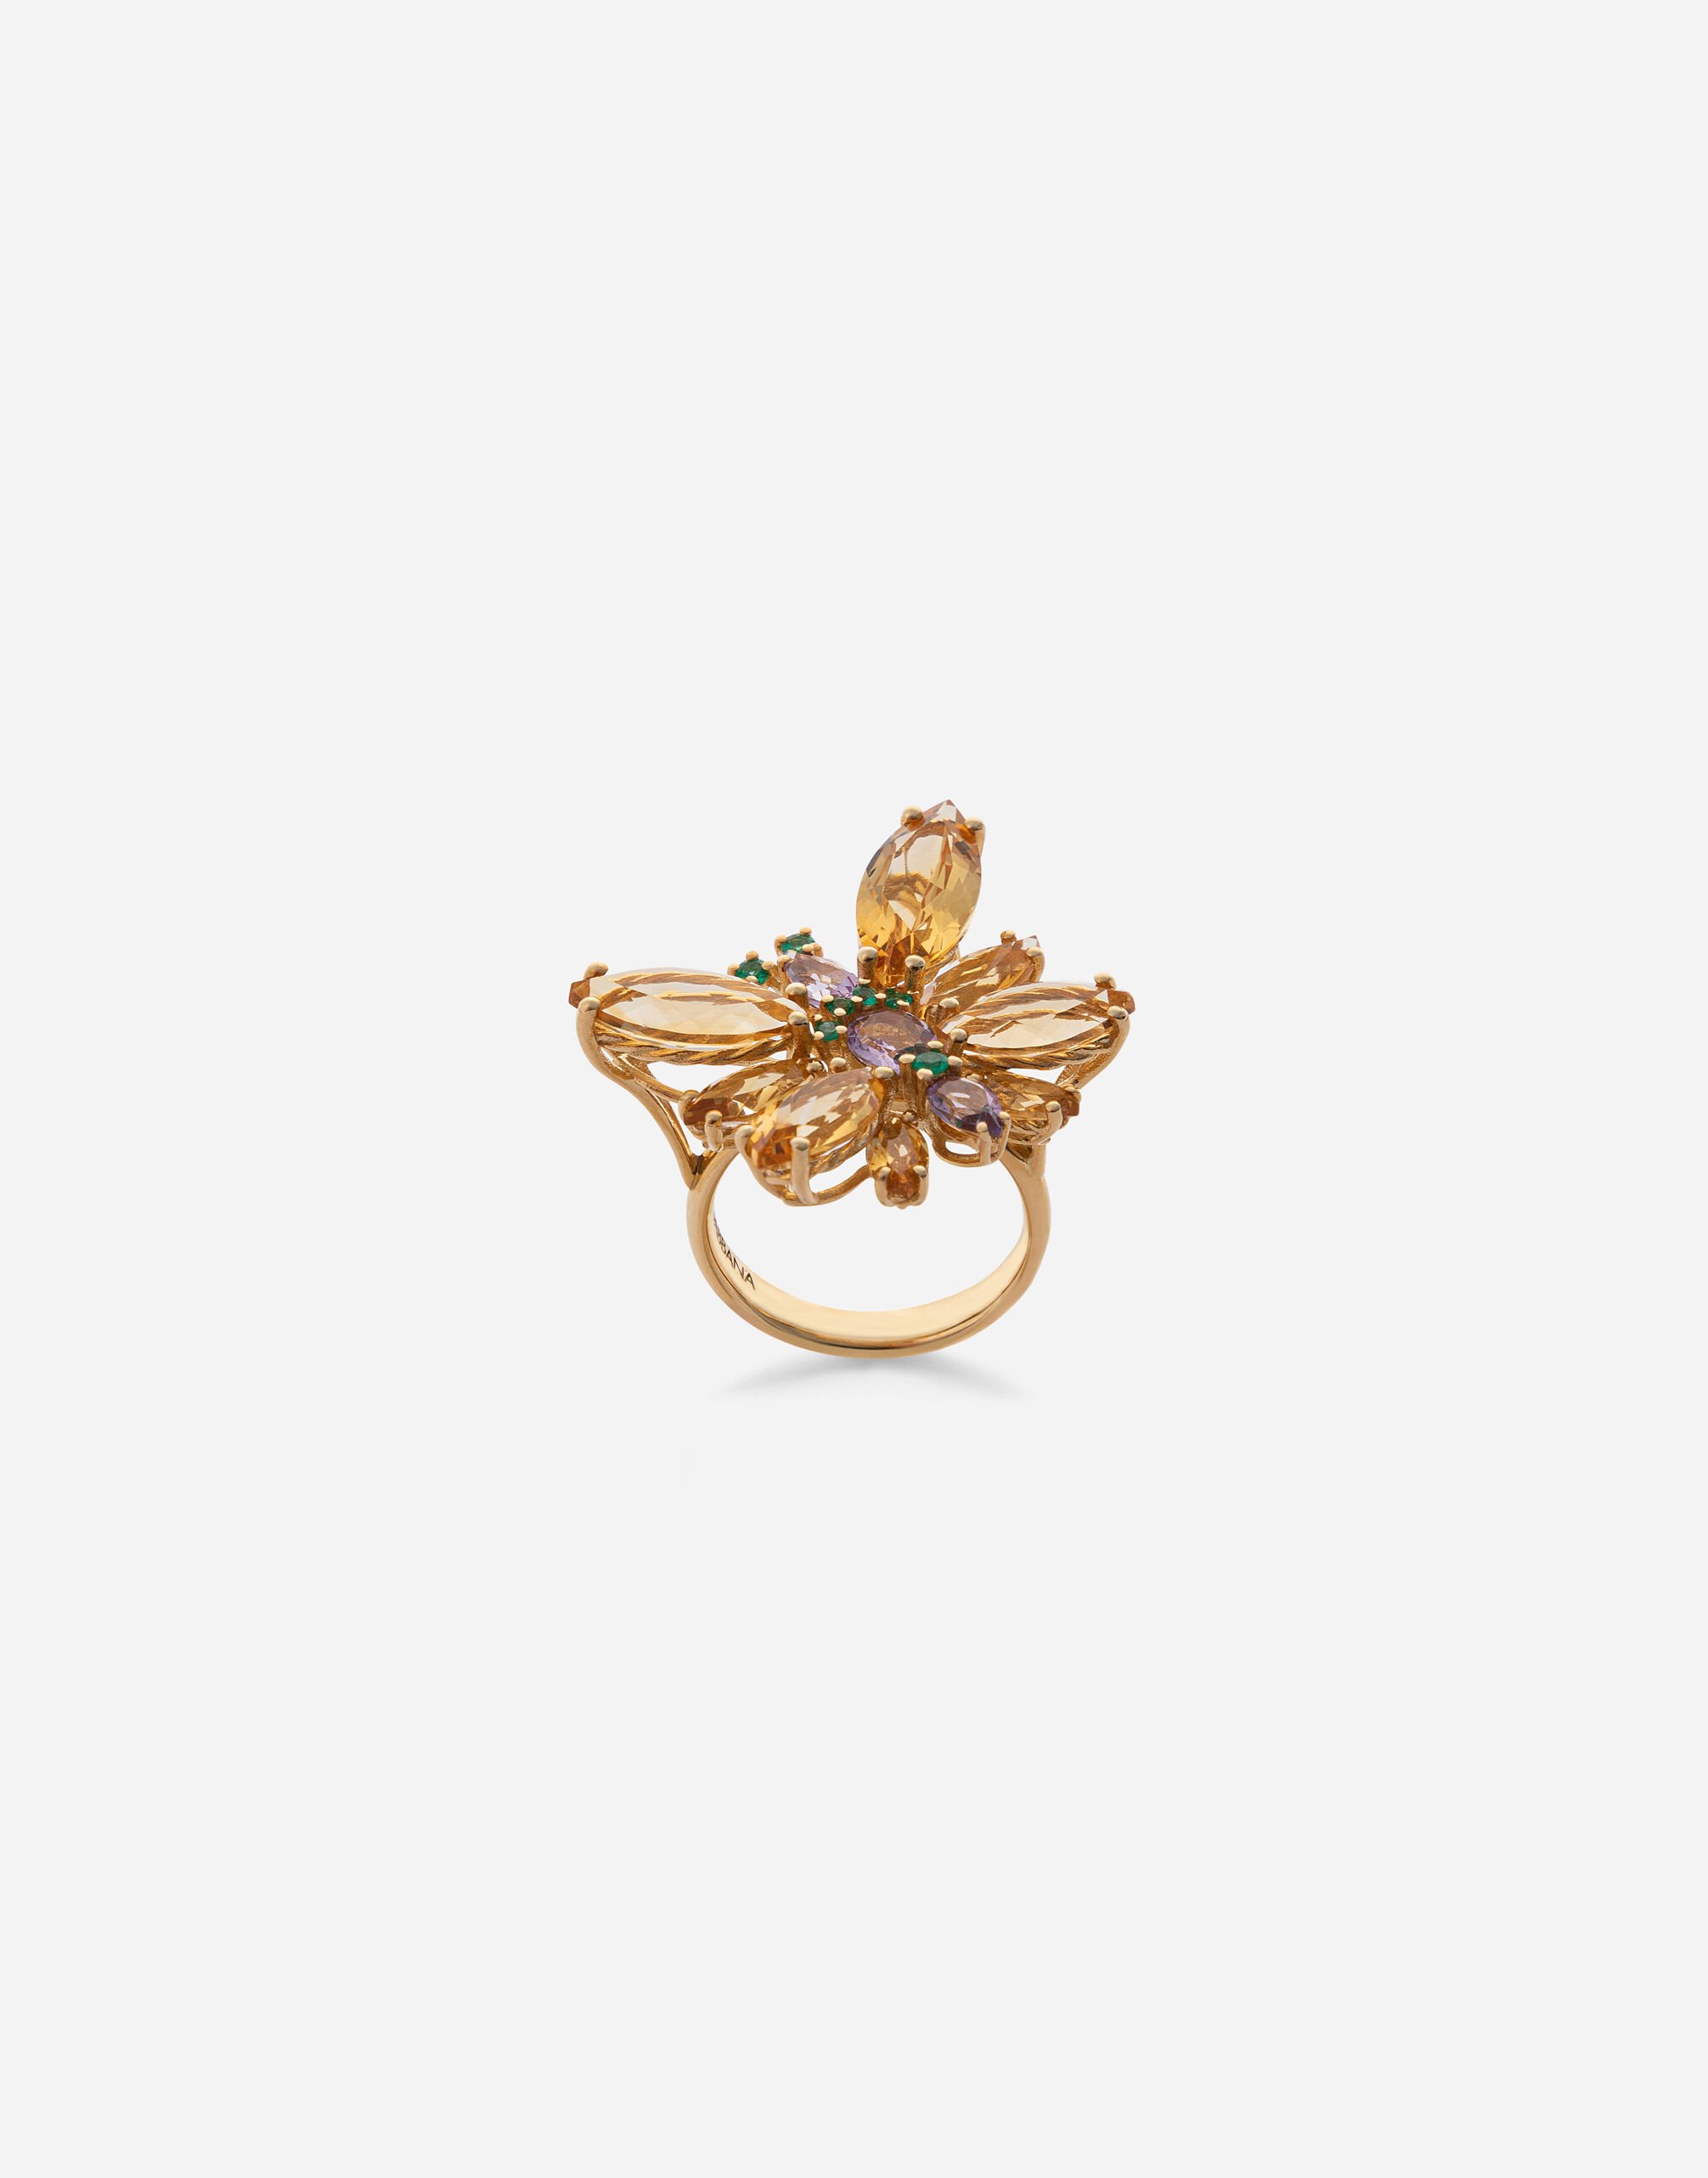 Dolce & Gabbana Spring ring in yellow 18kt gold with citrine butterfly Gold WRMR1GWMIXS